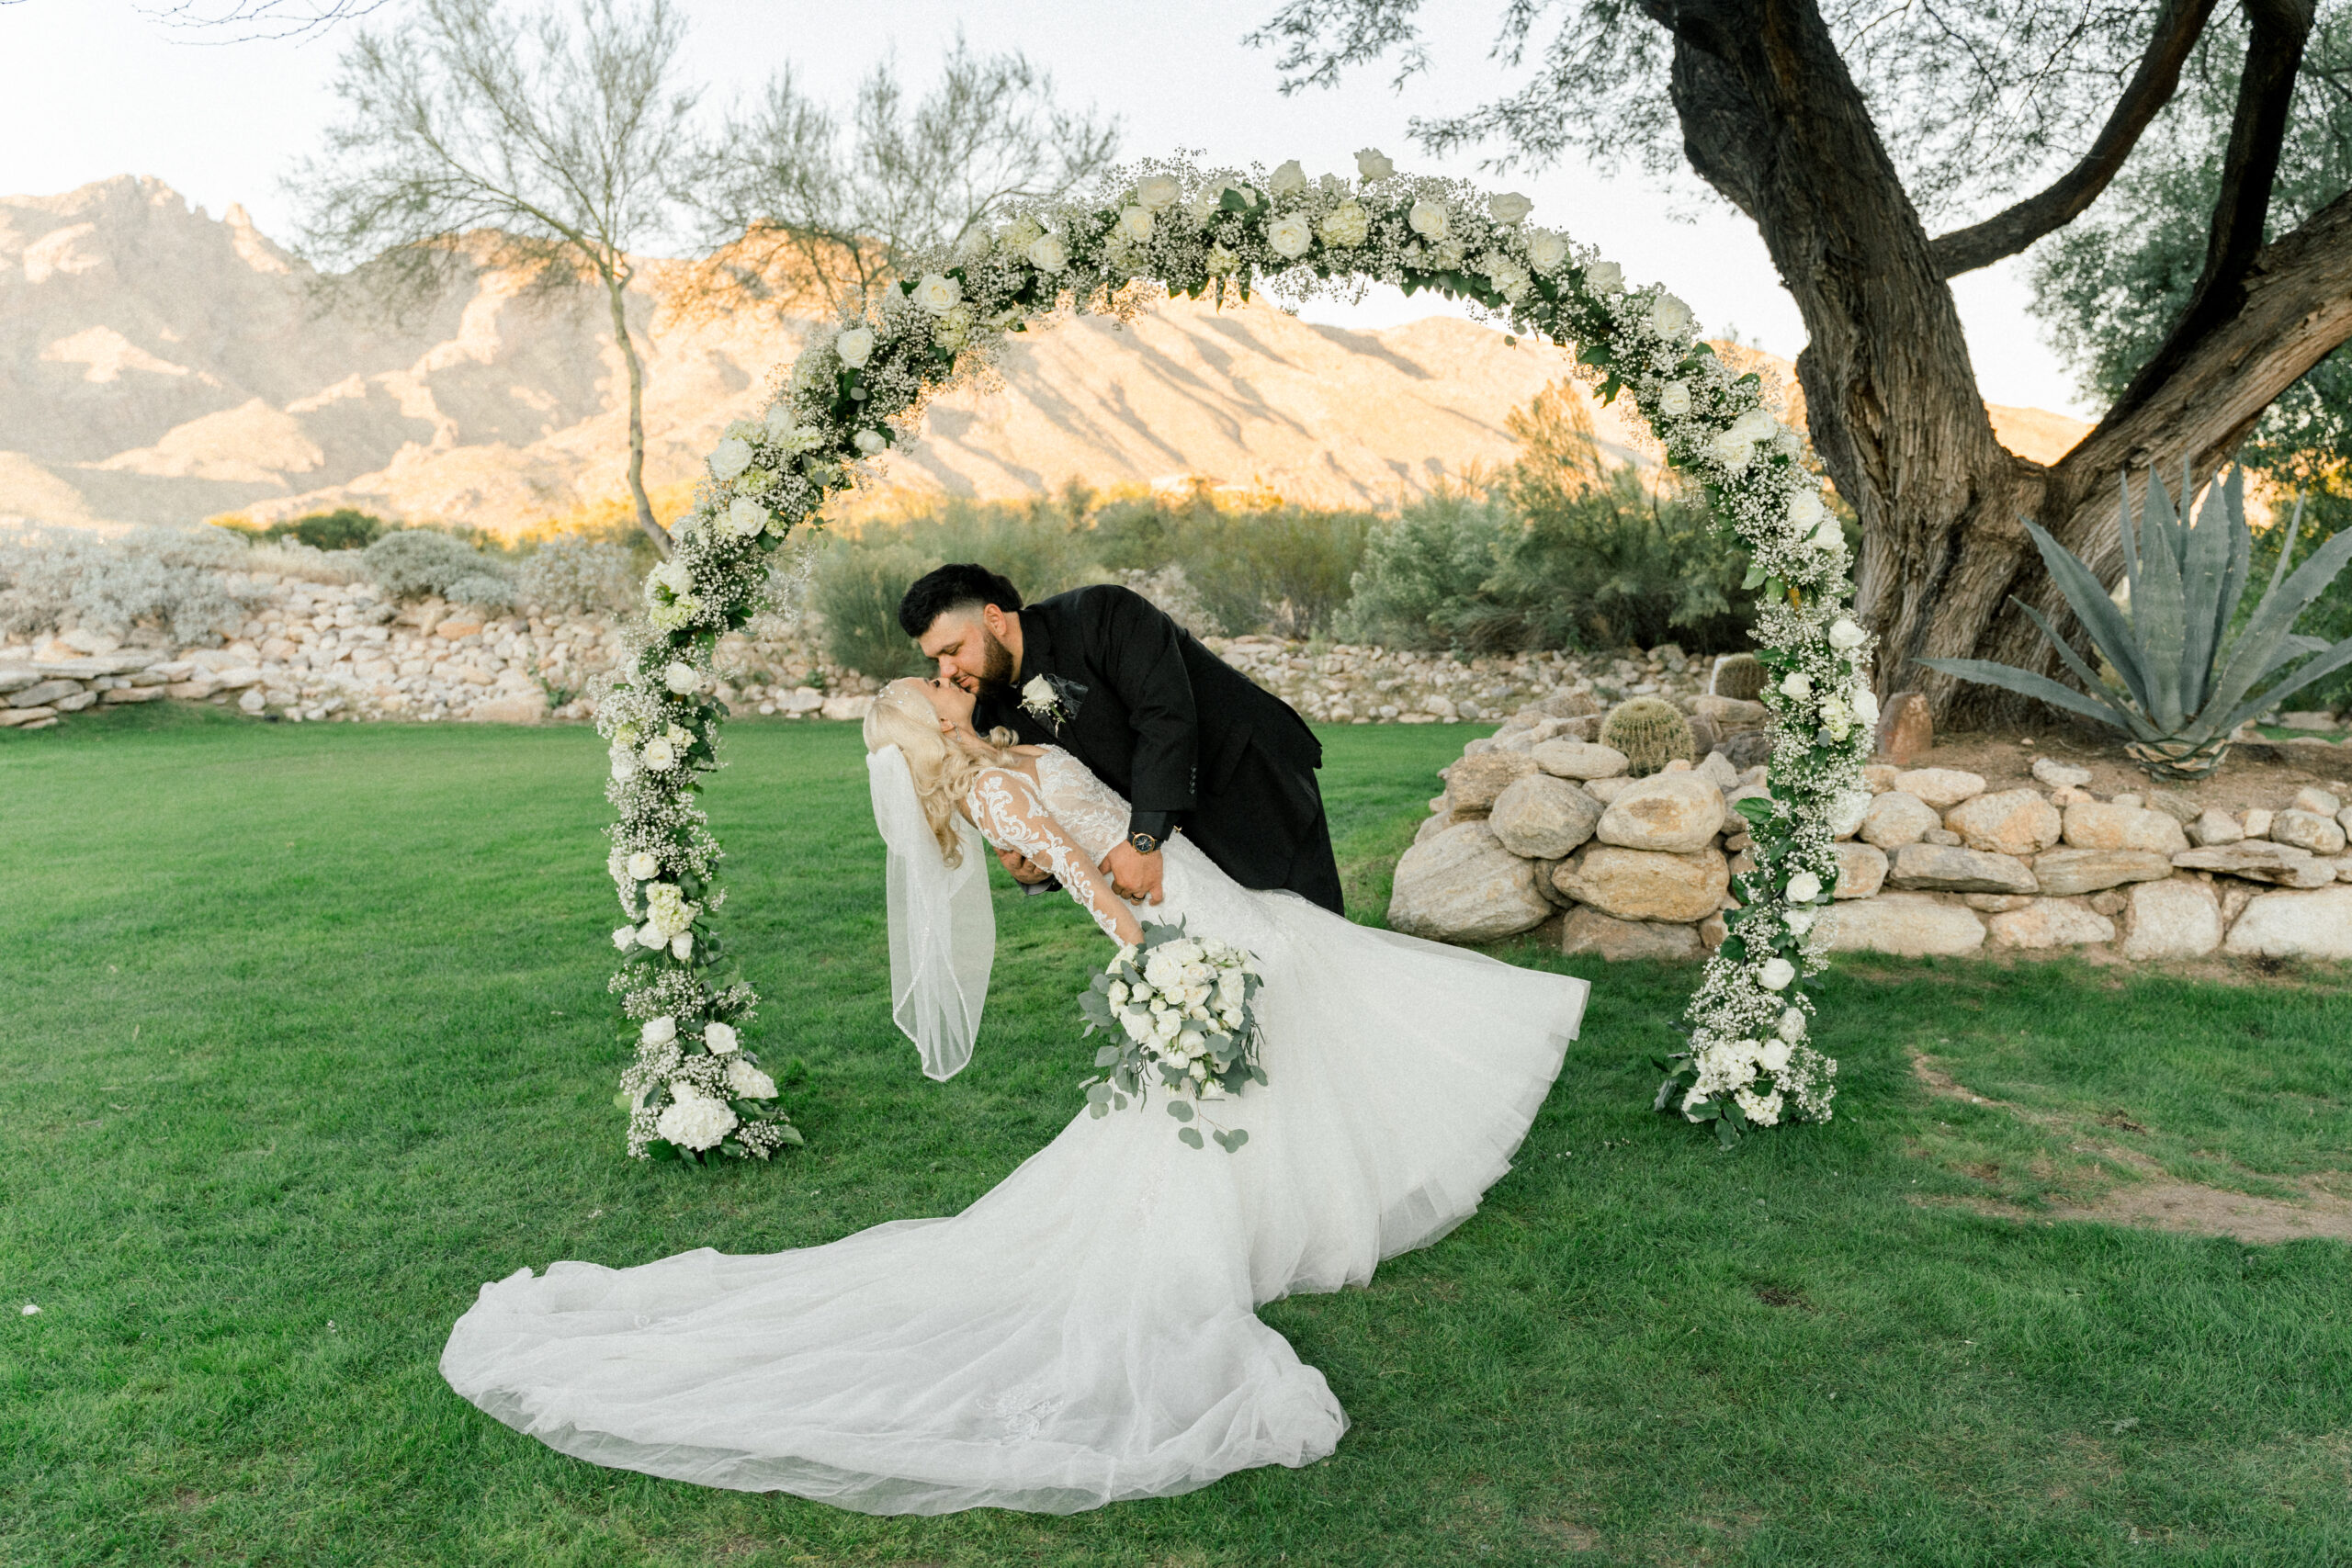 Wedding at Westin La Paloma in Tucson, AZ. Bride and groom kiss in front of a rose arch. Ruby Sandoval Photography.